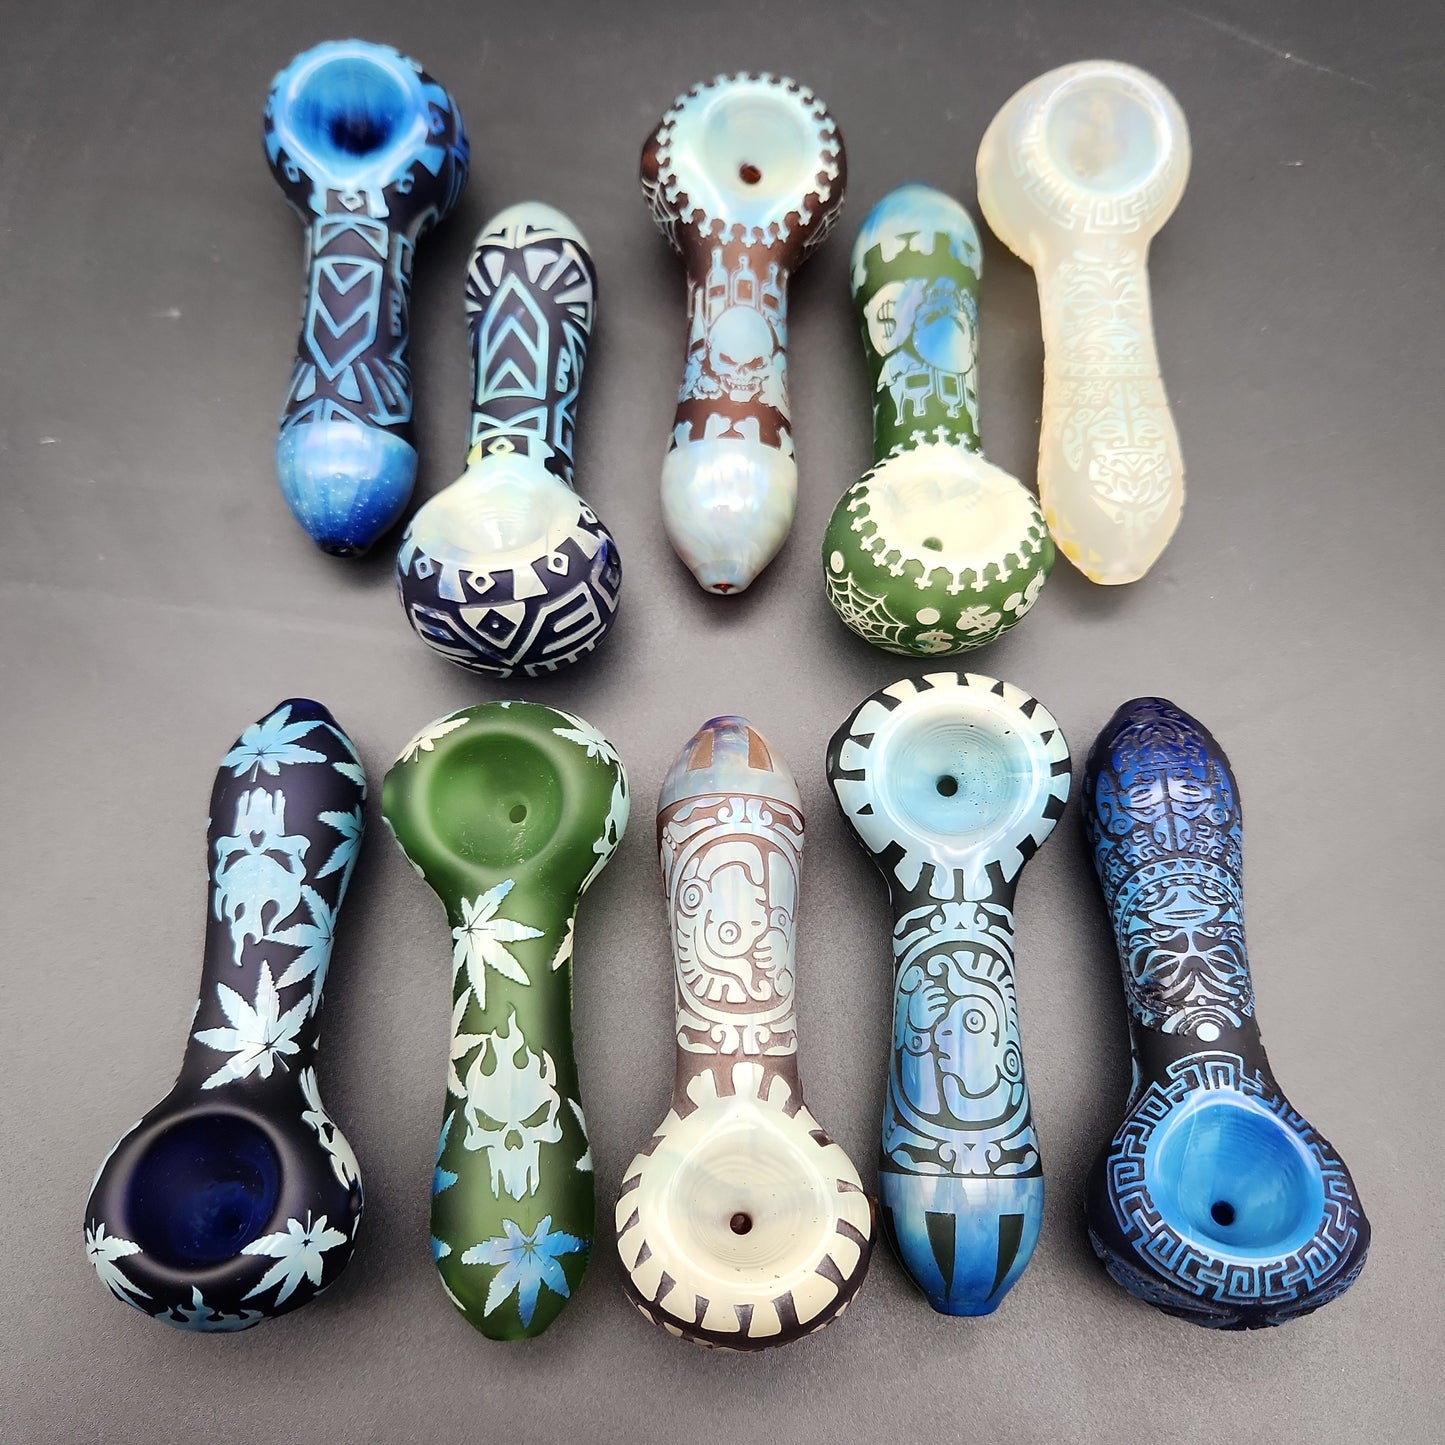 4" Etched + Sandblasted Spoon Pipes - Assorted Designs